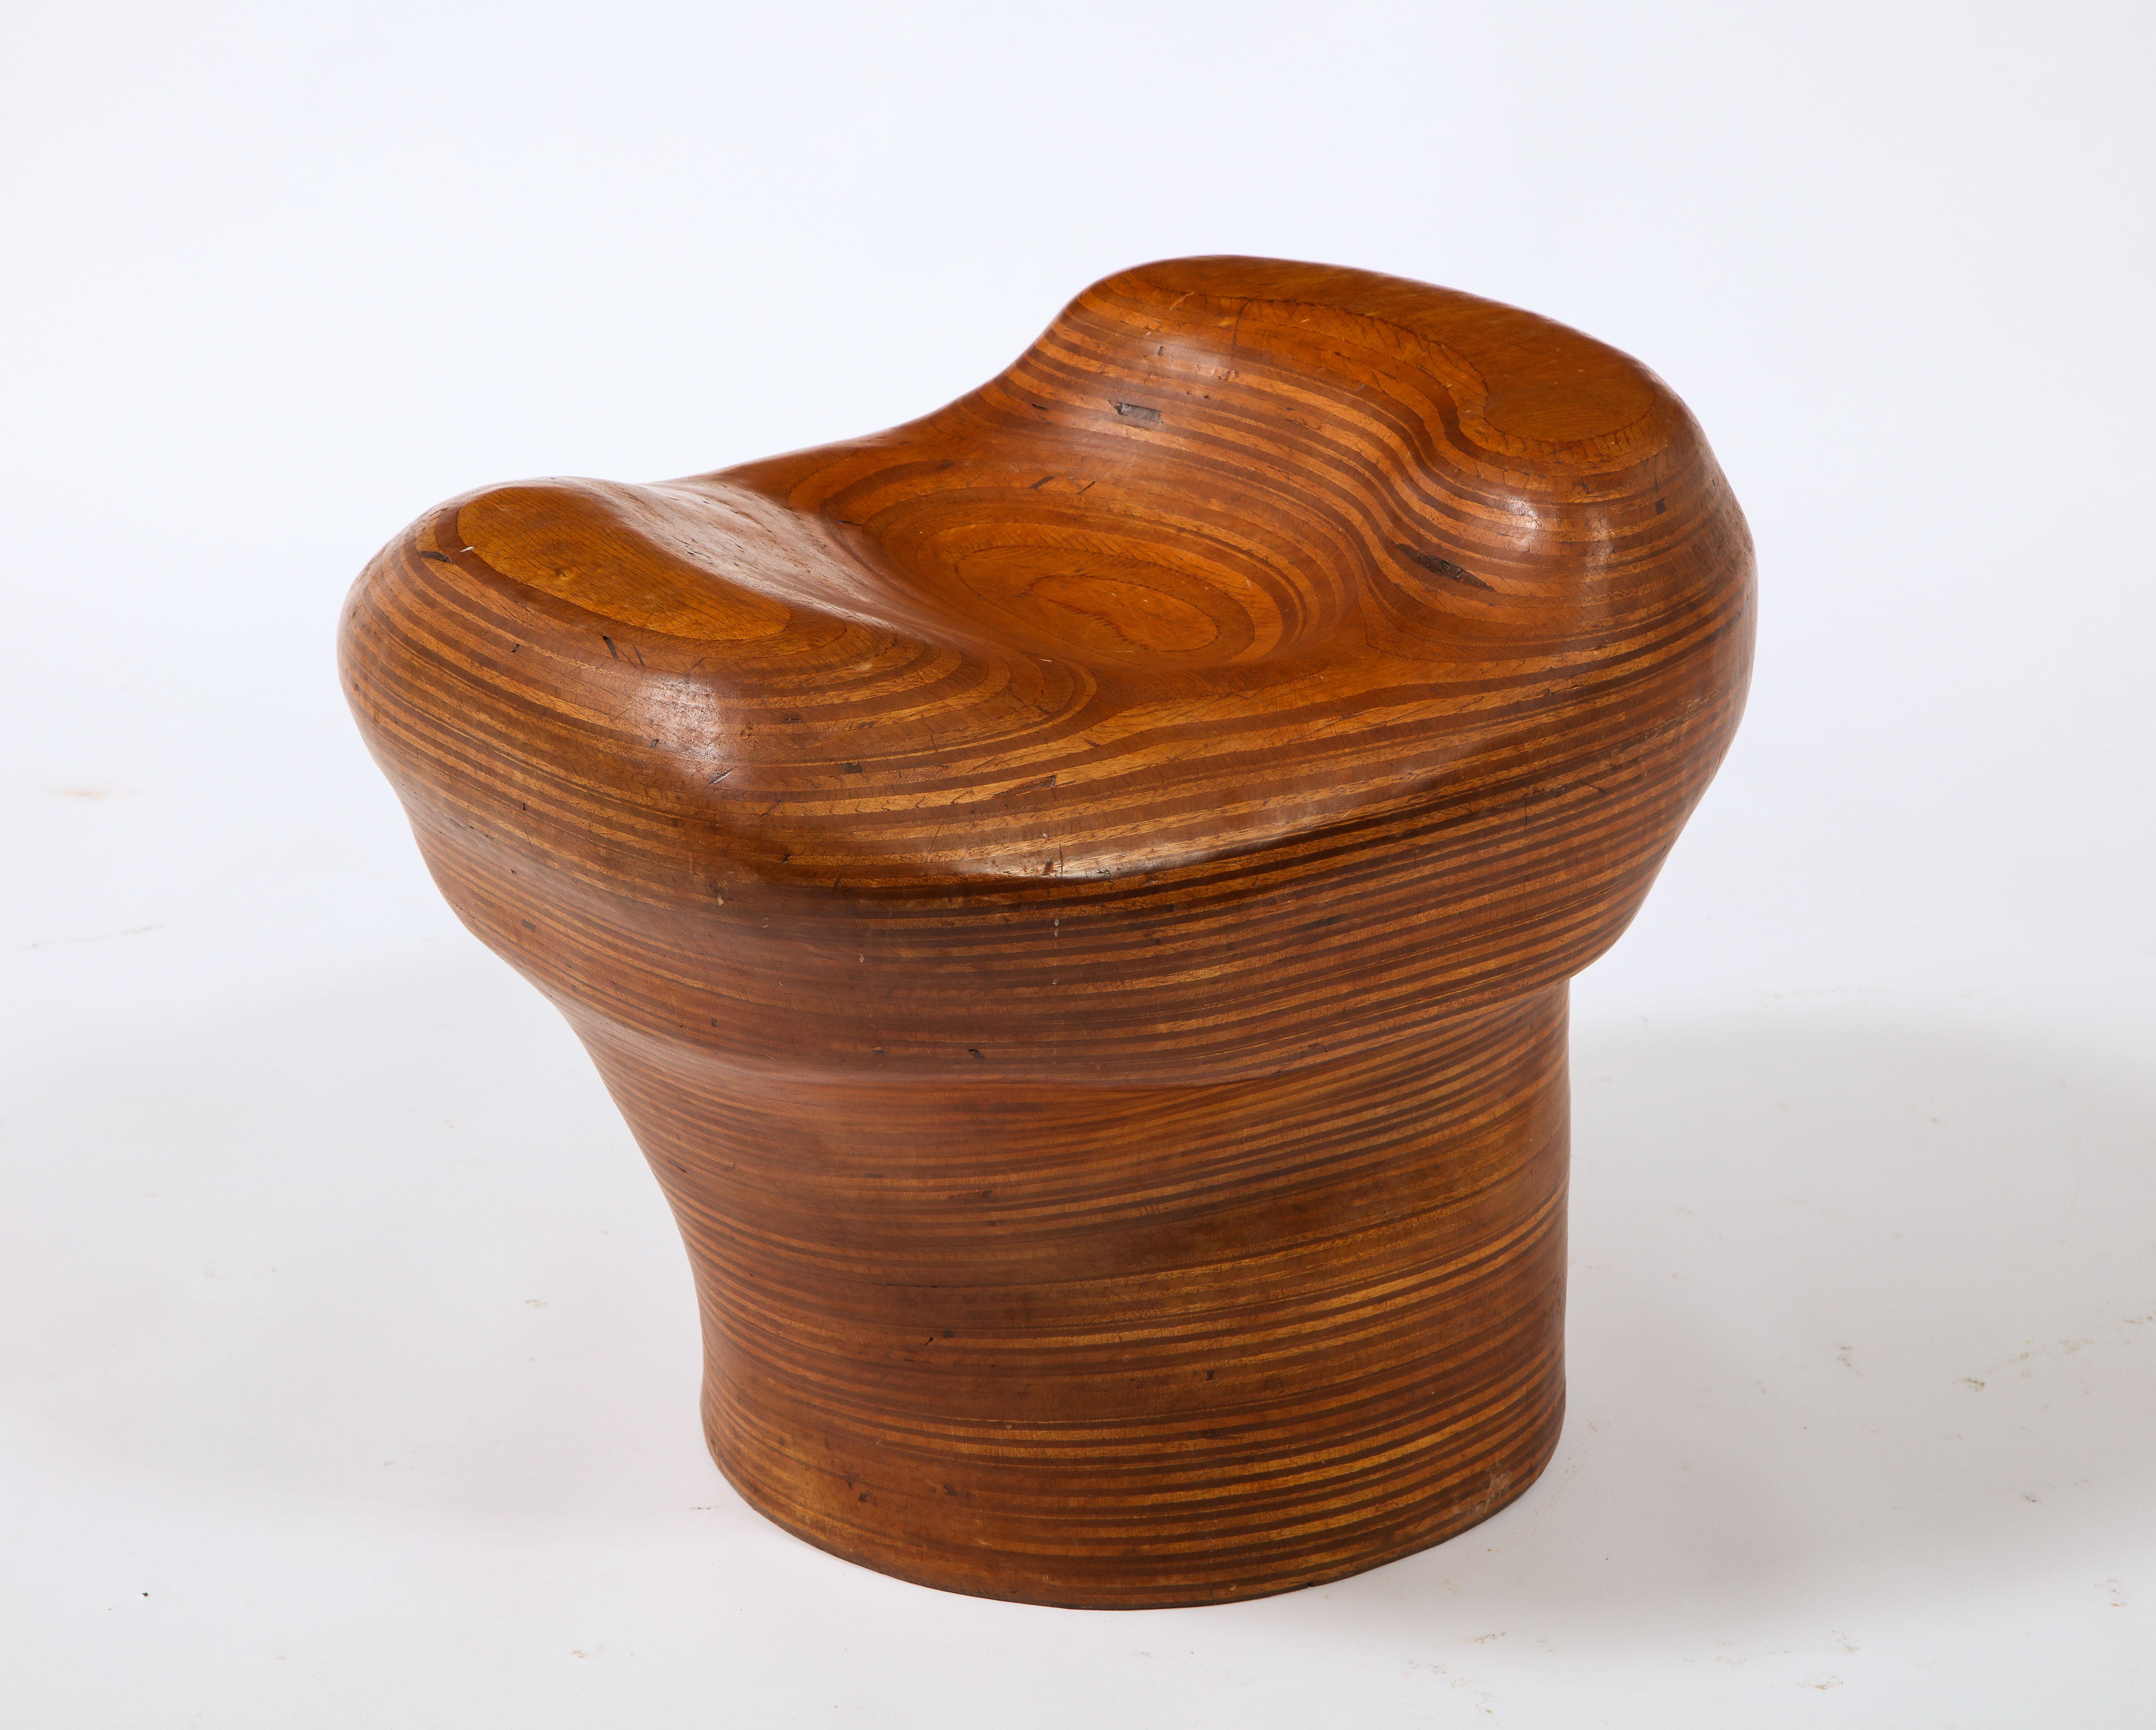 Denis Cospen Biomorphic Stool in Laminated Wood, France 1960's In Good Condition For Sale In New York, NY